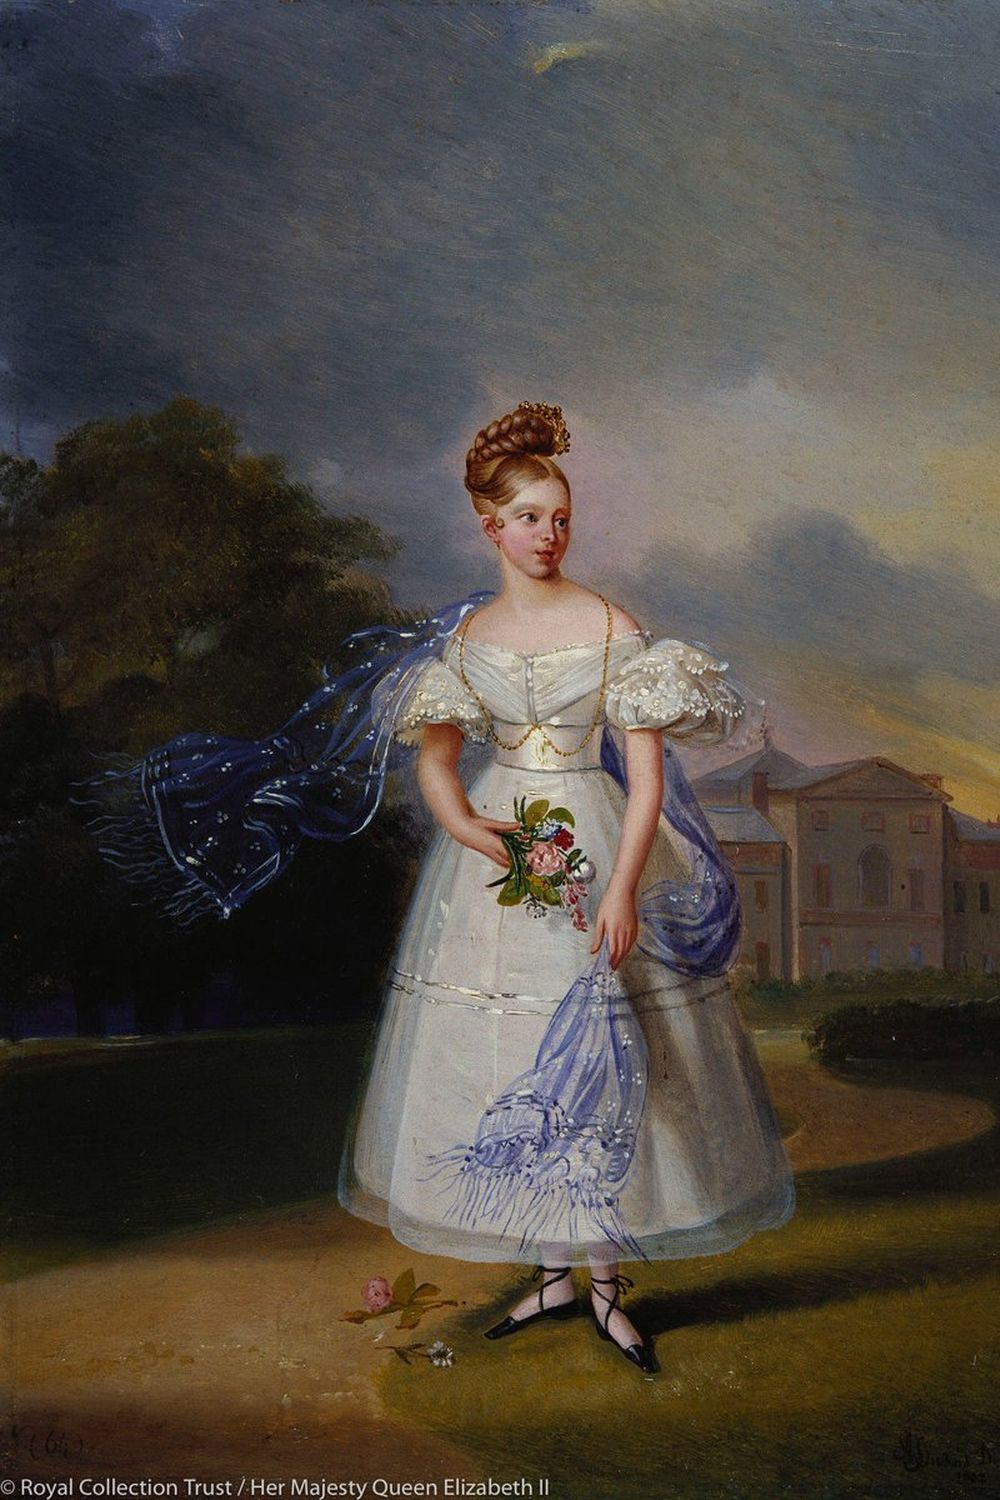 This painting by Alexandre-Jean Dubois Drahonet from 1832 shows a young Victoria in Kensington Palace Gardens, with the Palace visible in the background